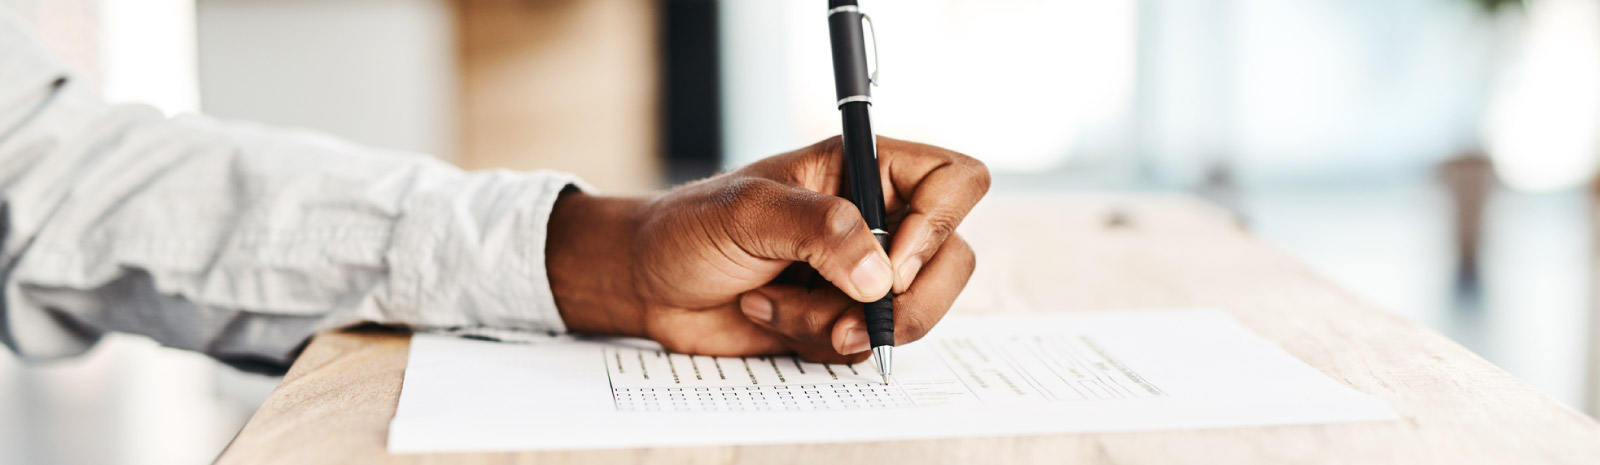 Man using pen to complete forms